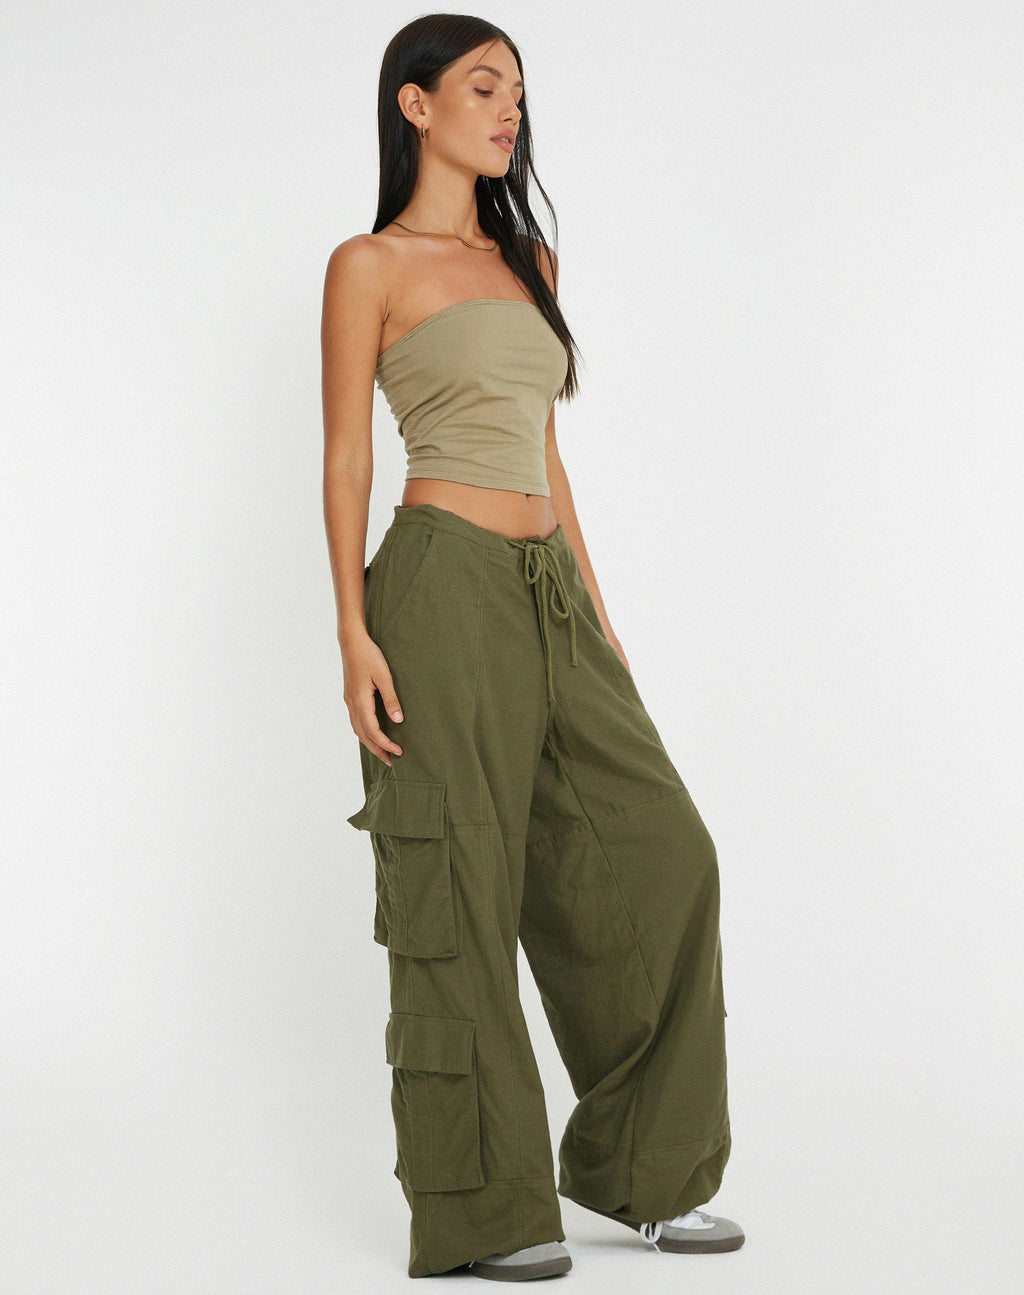 Philia Trouser in Loden Green